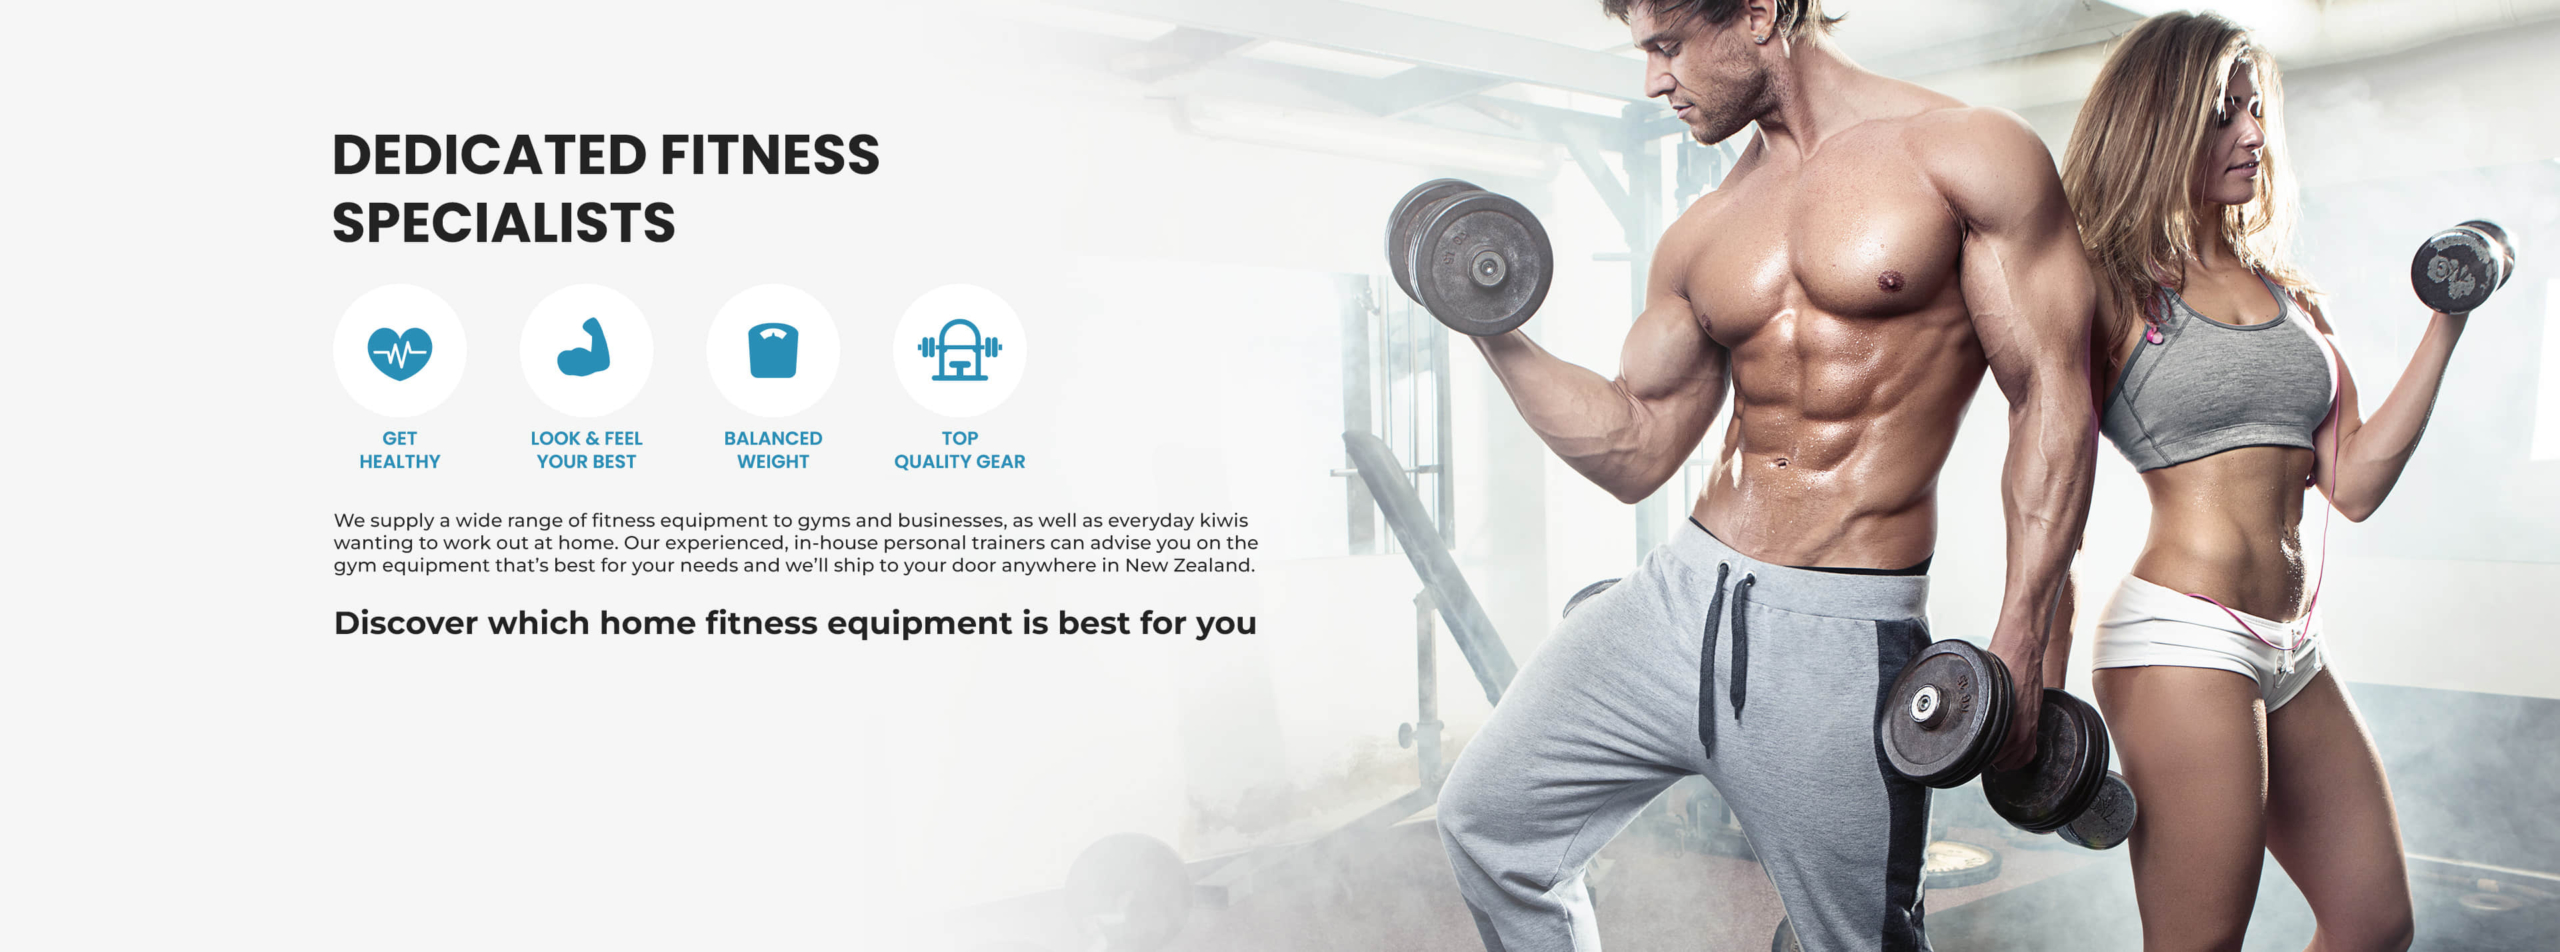 Dedicated fitness specialists at Lee Warehouse